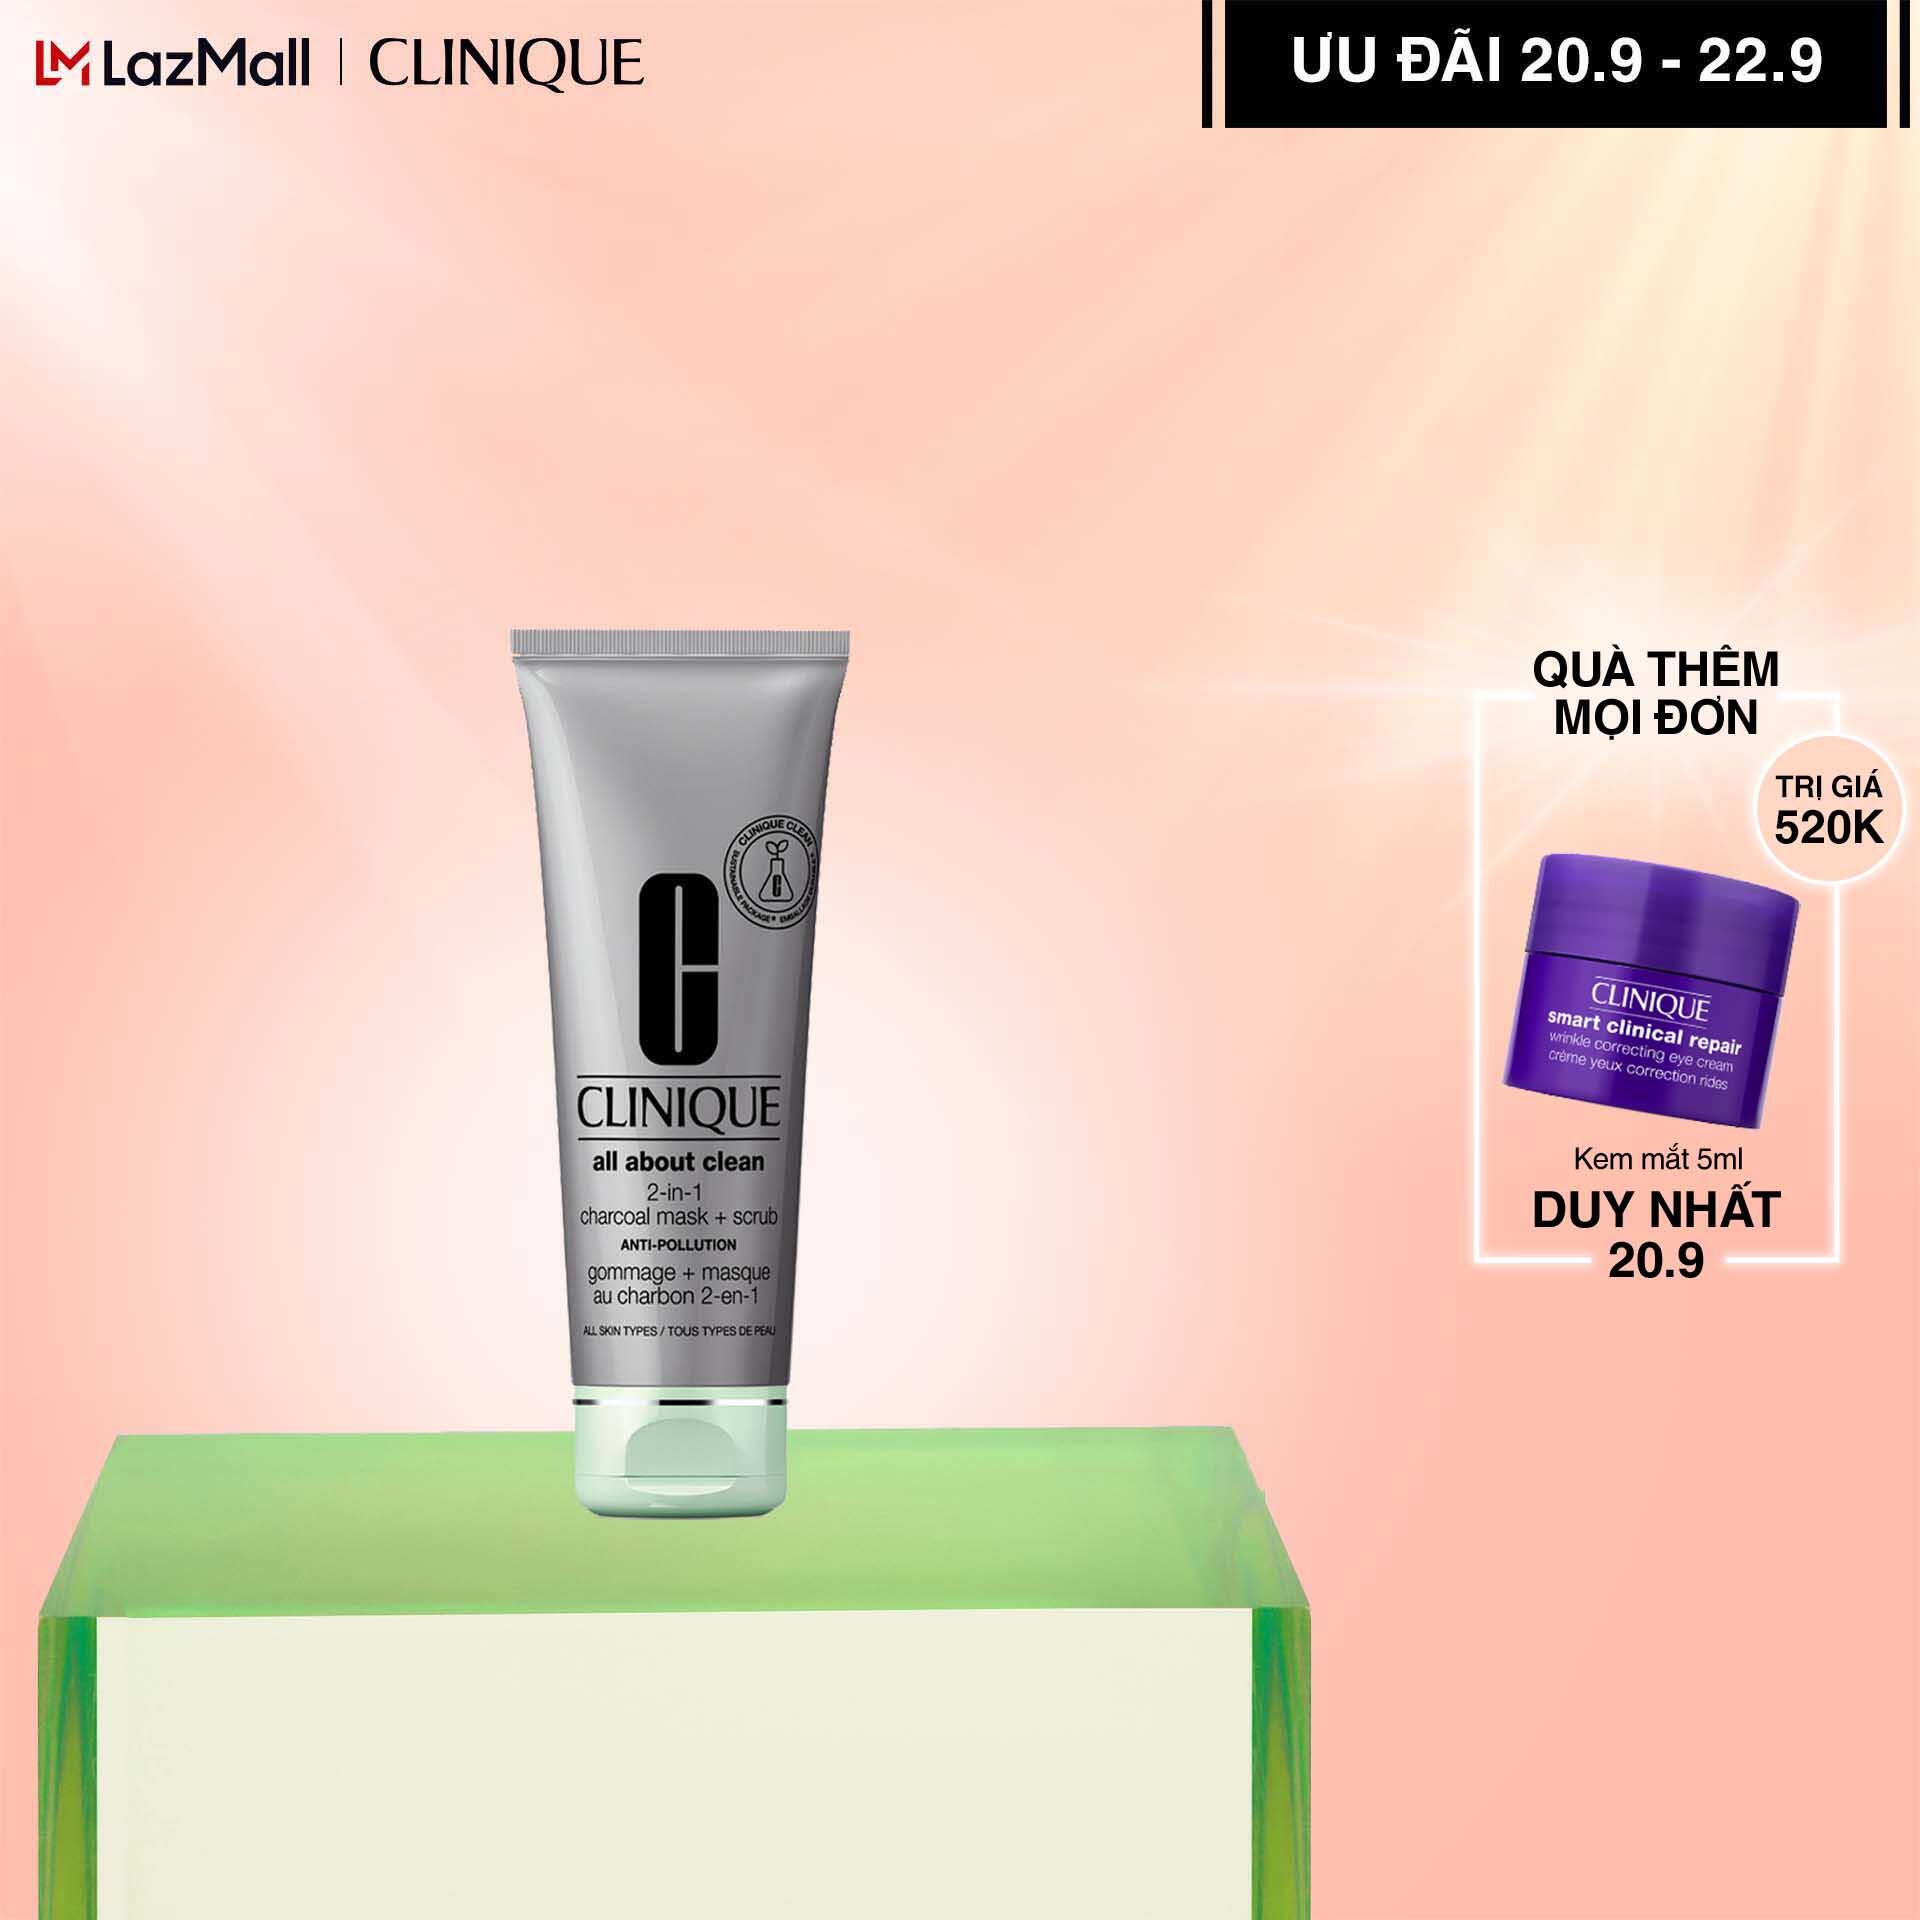 Clinique All About Clean Charcoal Mask + Scrub - Face Mask & Scrub 100ml